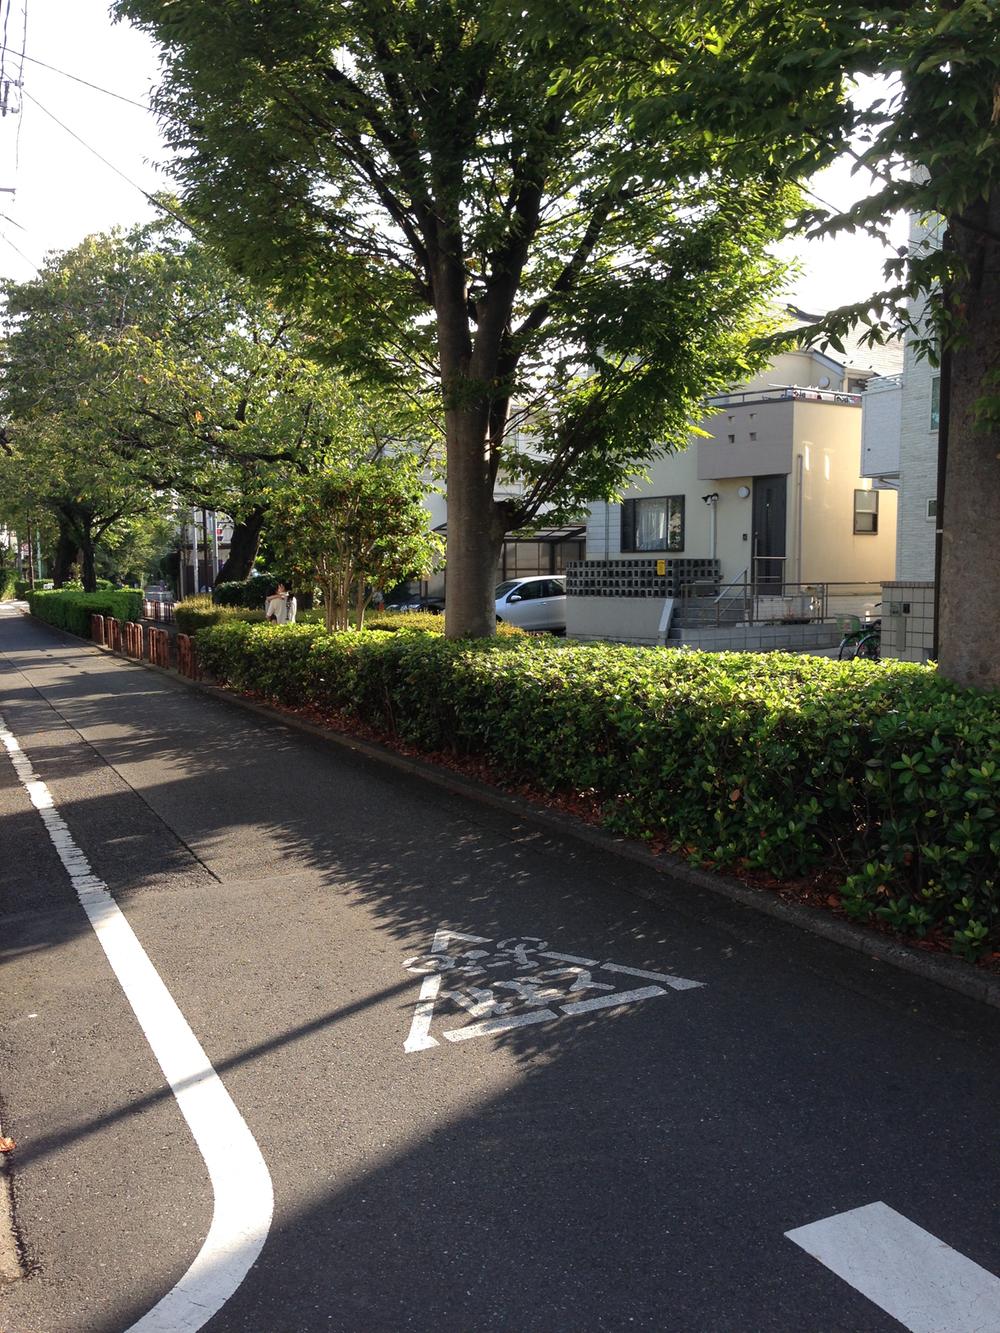 Local photos, including front road. 呑川 is the side of the green road! 